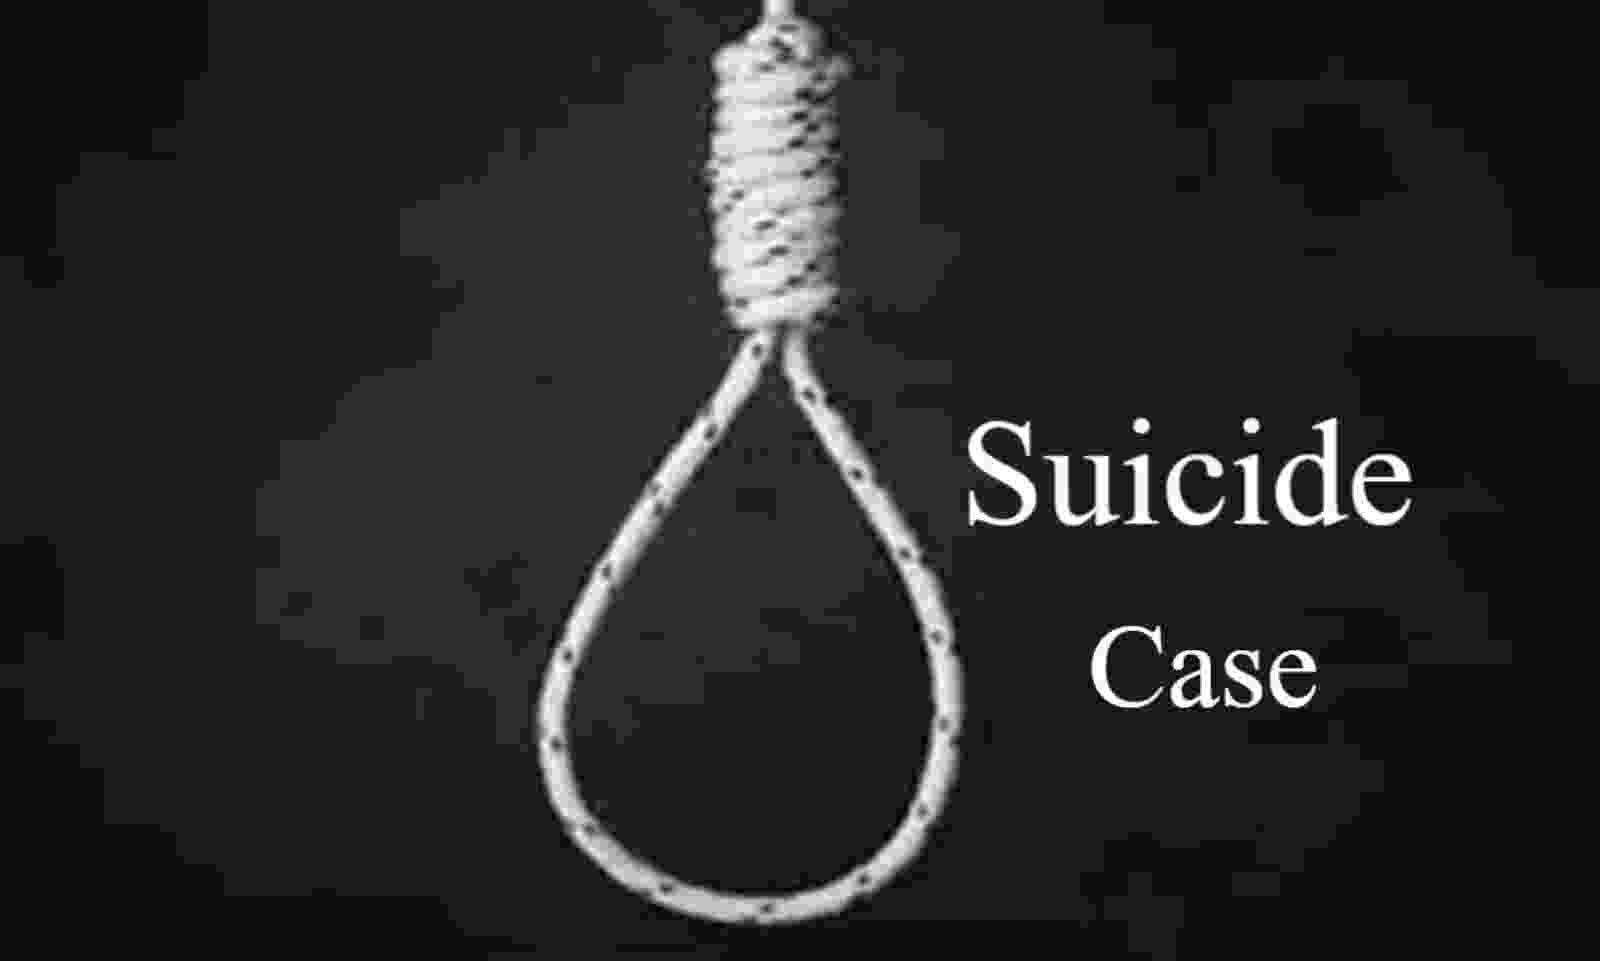 After the wife's suicide, the husband also commits suicide